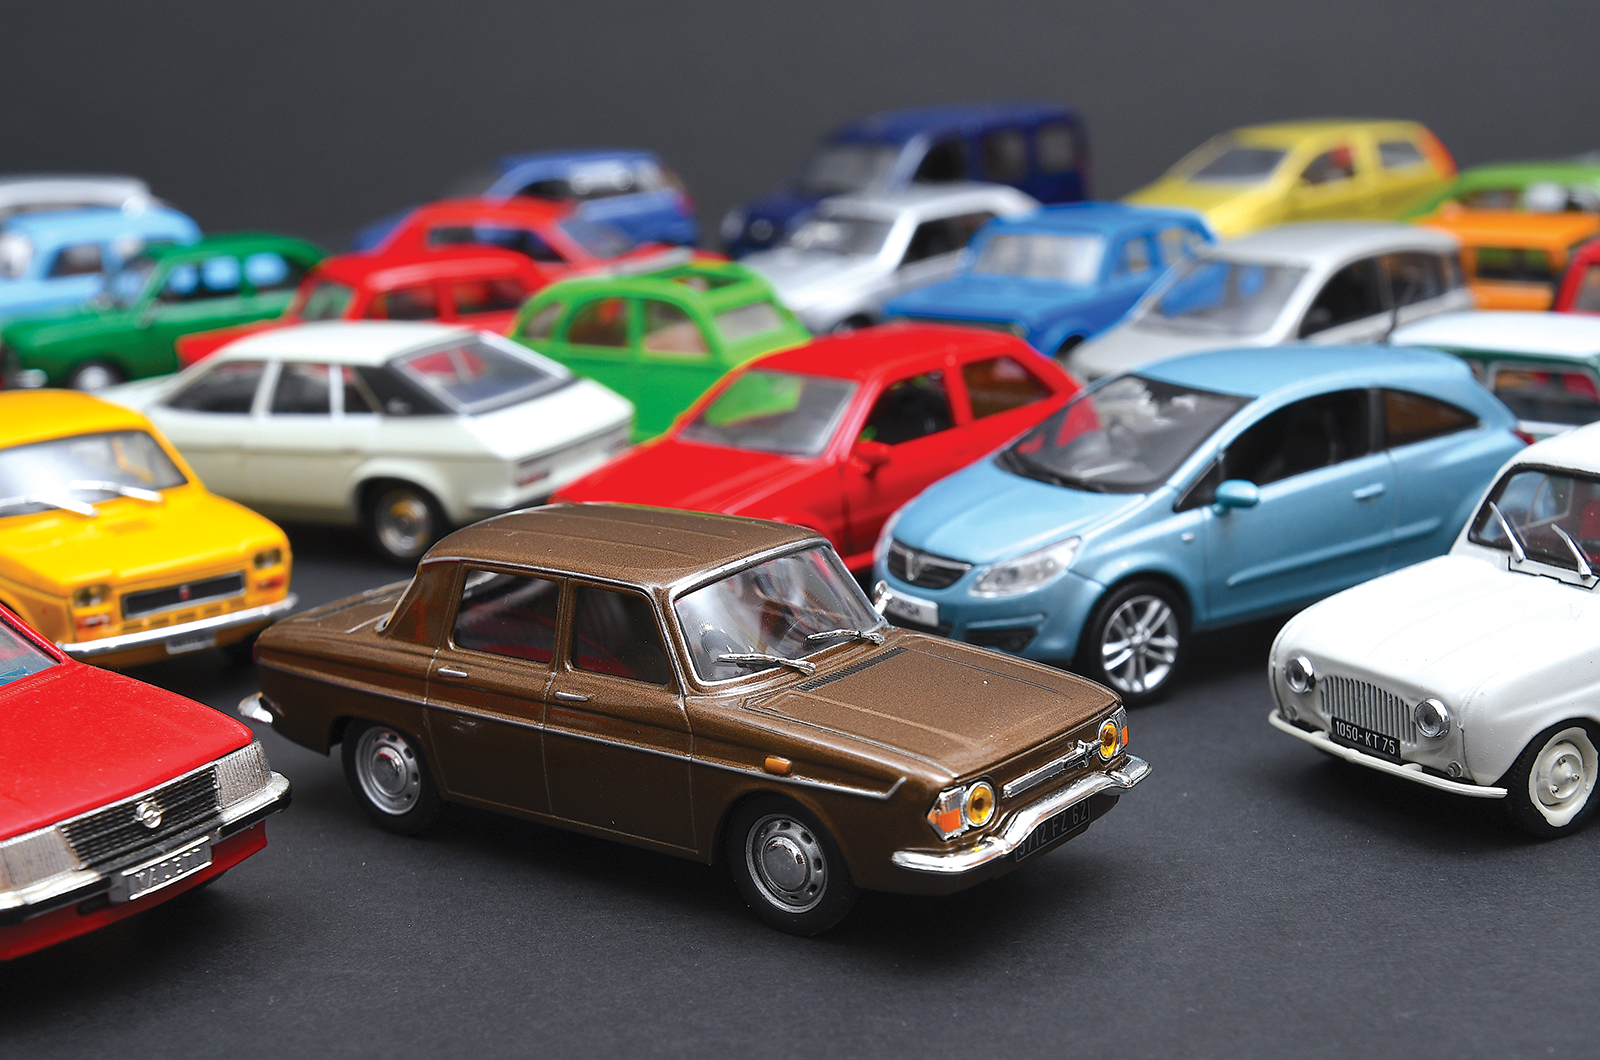 Classic & Sports Car – Also in my garage: 5000 model cars